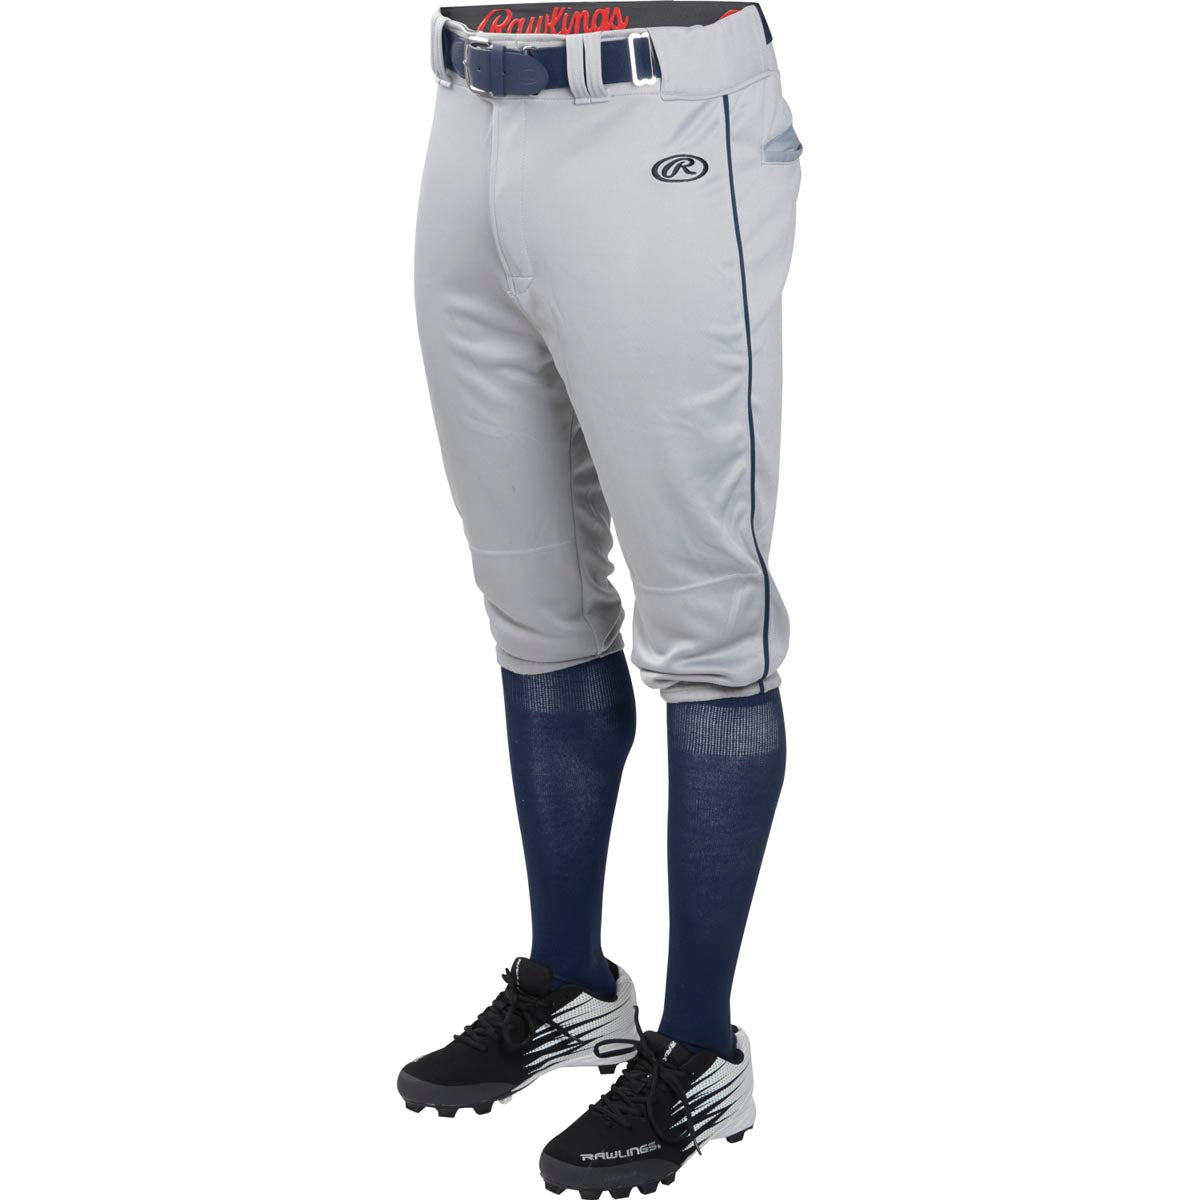 Rawlings Knicker Launch Pant with Pipe Adult